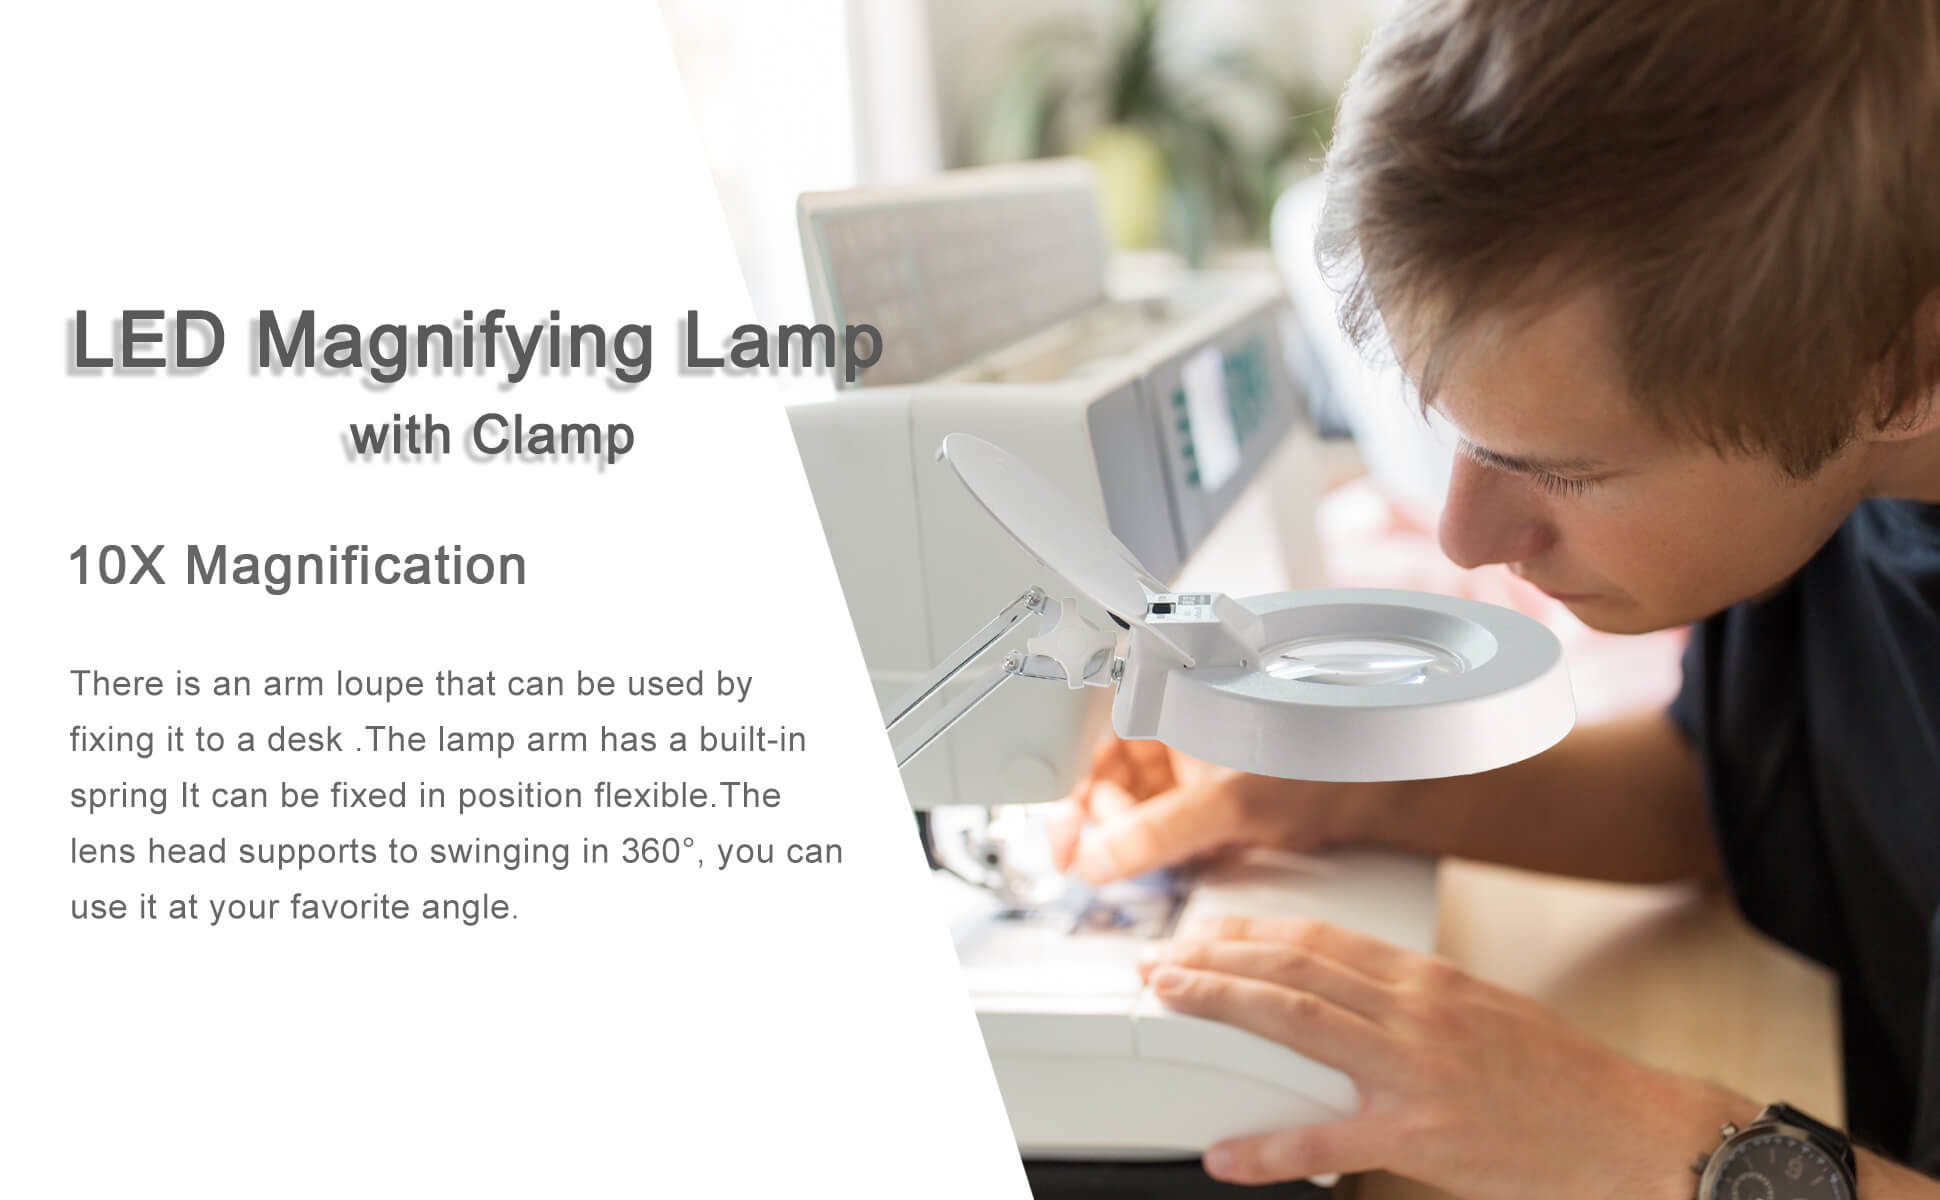 Gynnx LED Magnifying Lamp with Clamp, 10X Magnifier 4200 Lumens,5 Inch  Magnifier Glass Lens, 120 PCS LEDs,Adjustable Stainless Steel Lamp Arm for  Reading,Craft,Knitting,Desktop Office Workbench MY1 